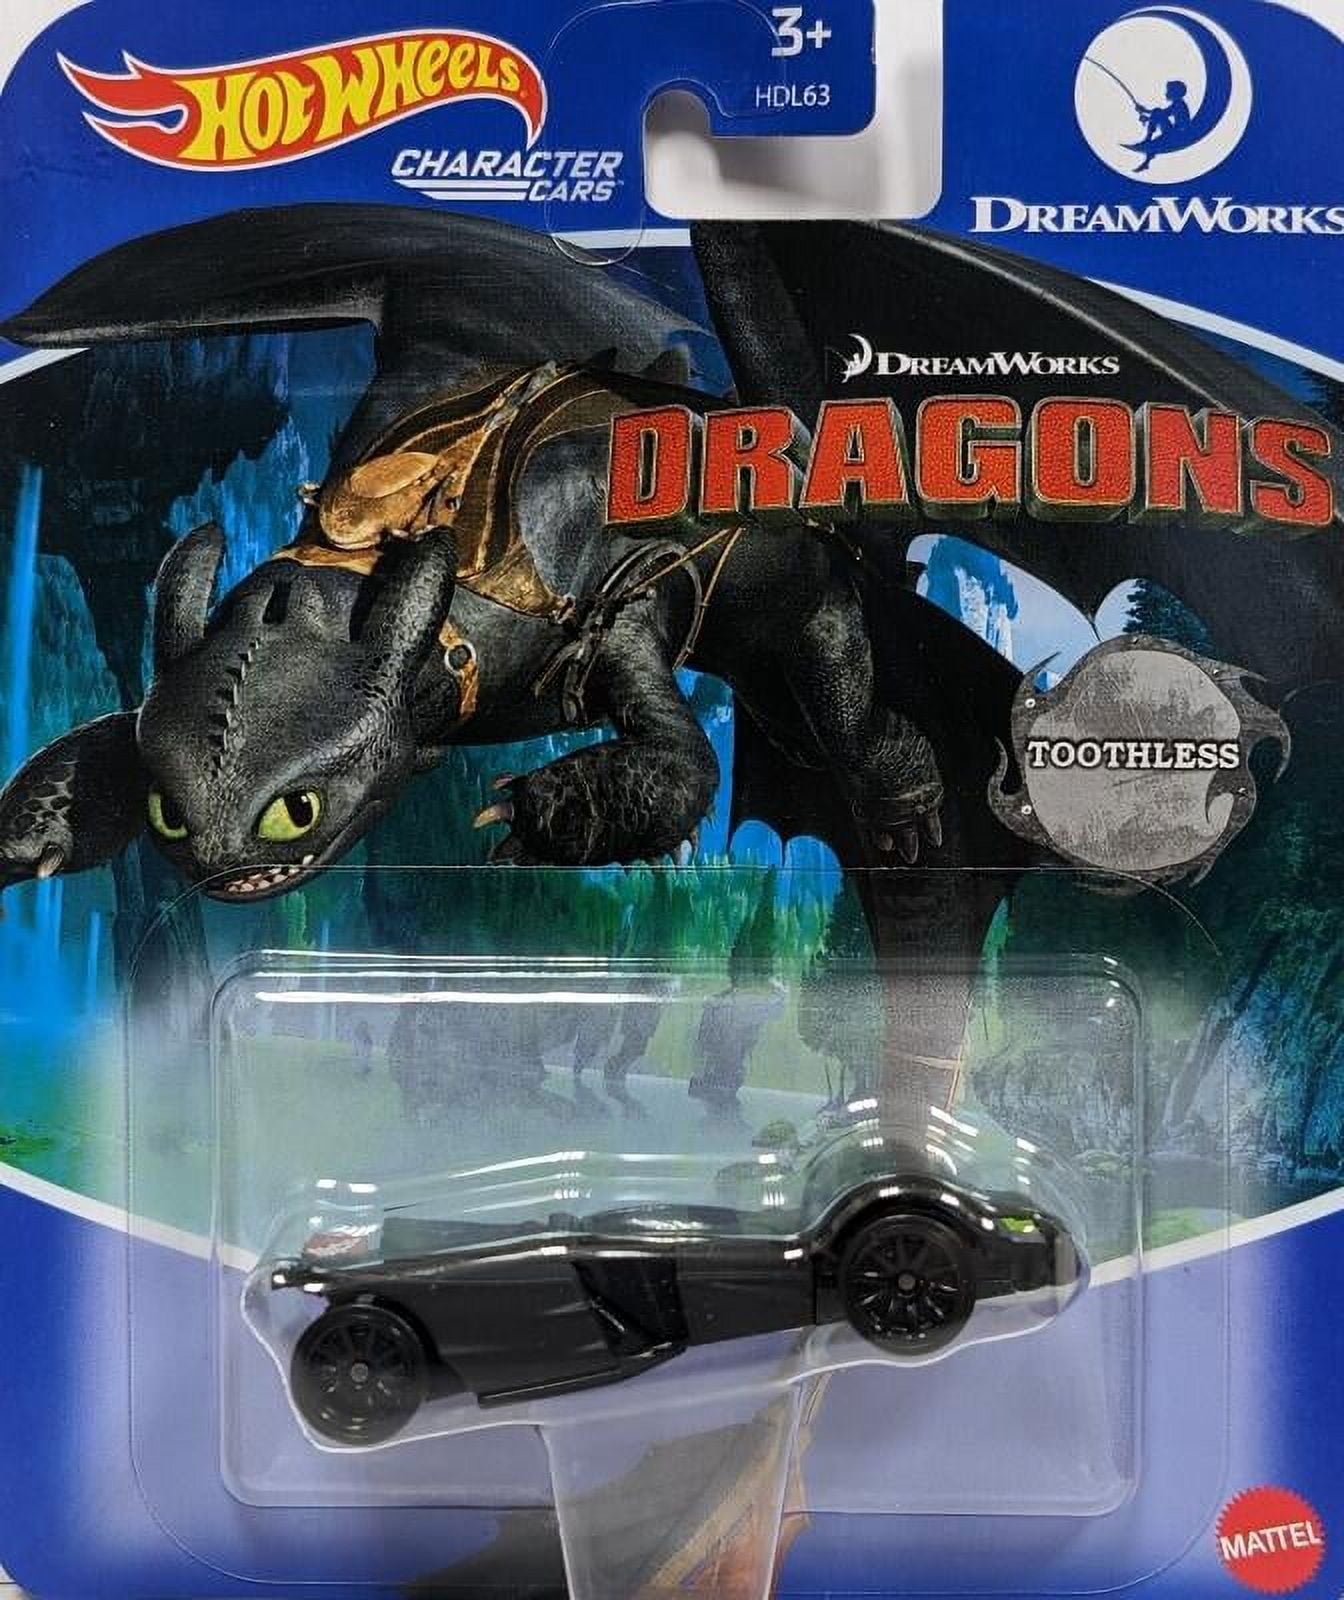 Hot Wheels City Dragon Launch Transporter, Spits Cars From Its Mouth, Gift  for Kids 3 Years & Up